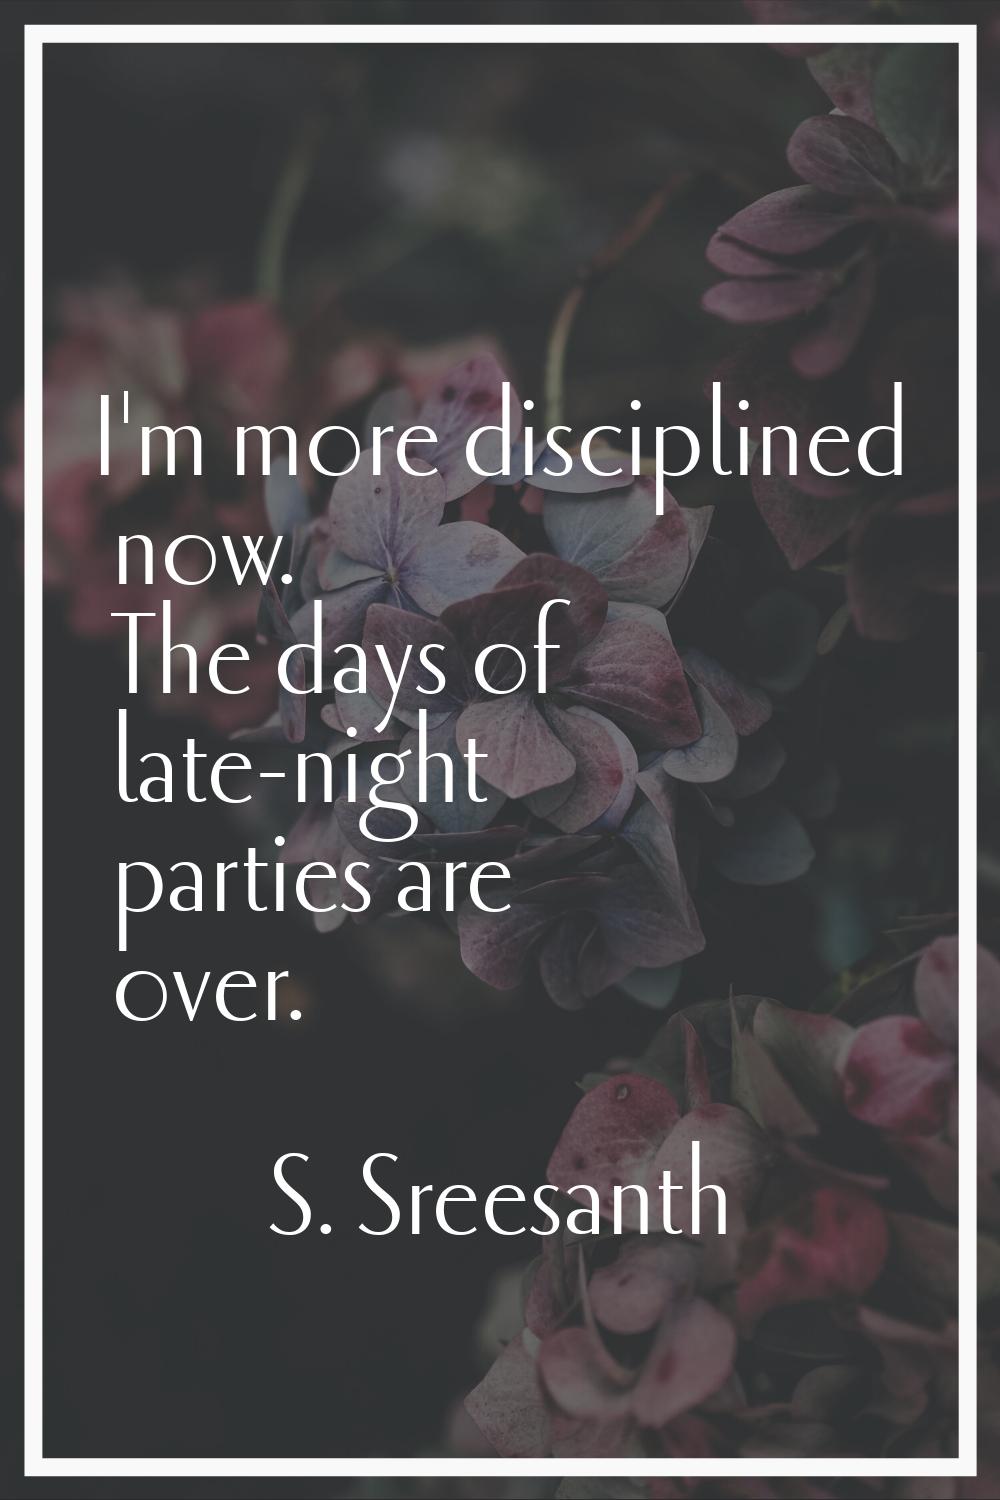 I'm more disciplined now. The days of late-night parties are over.